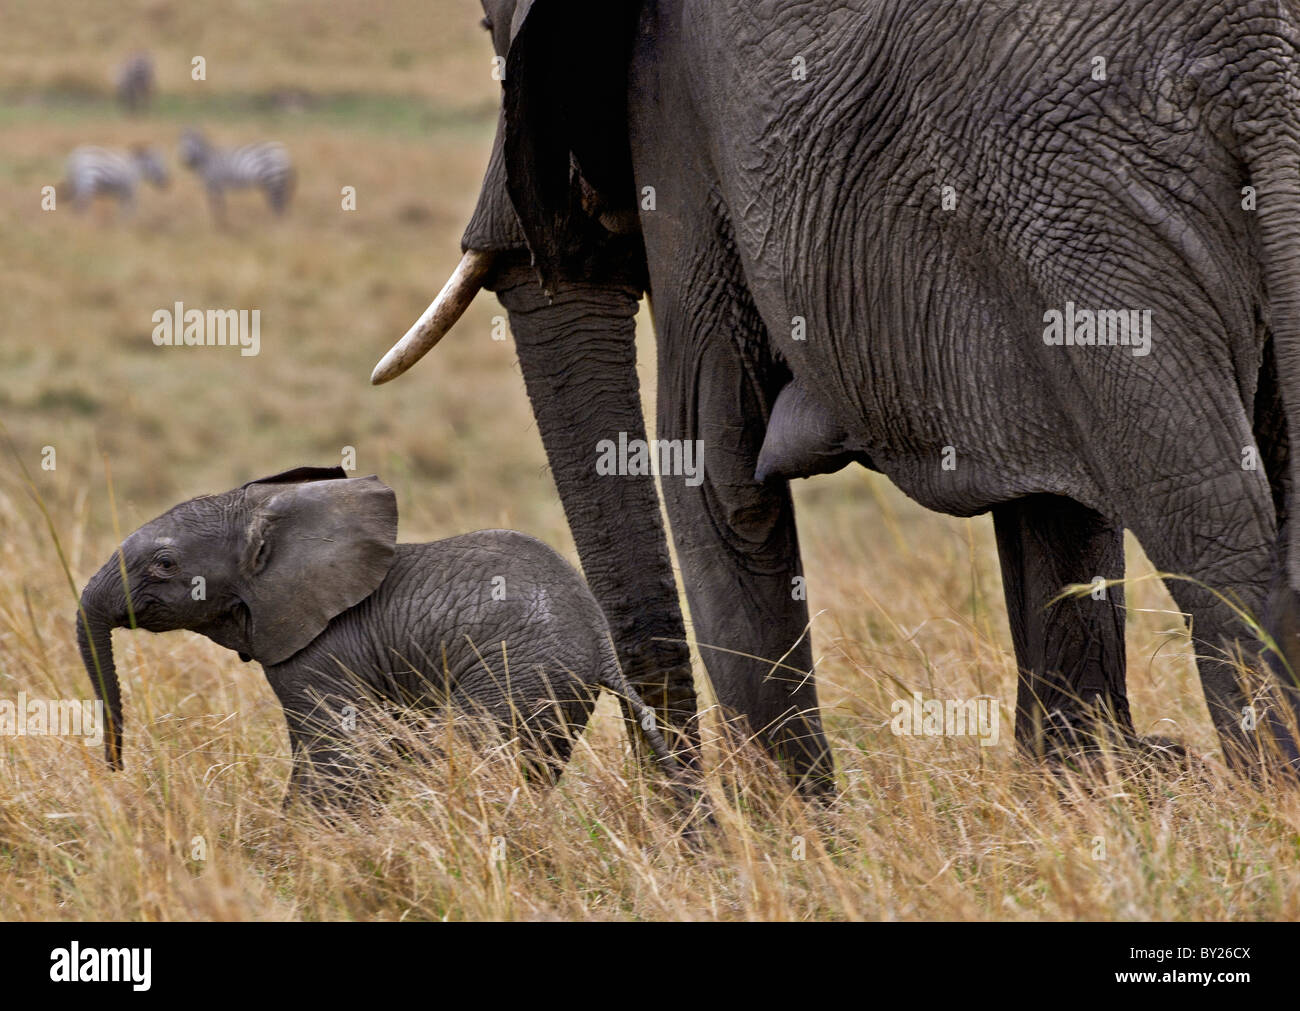 An elephant and her small calf in Masai-Mara National Reserve. Stock Photo